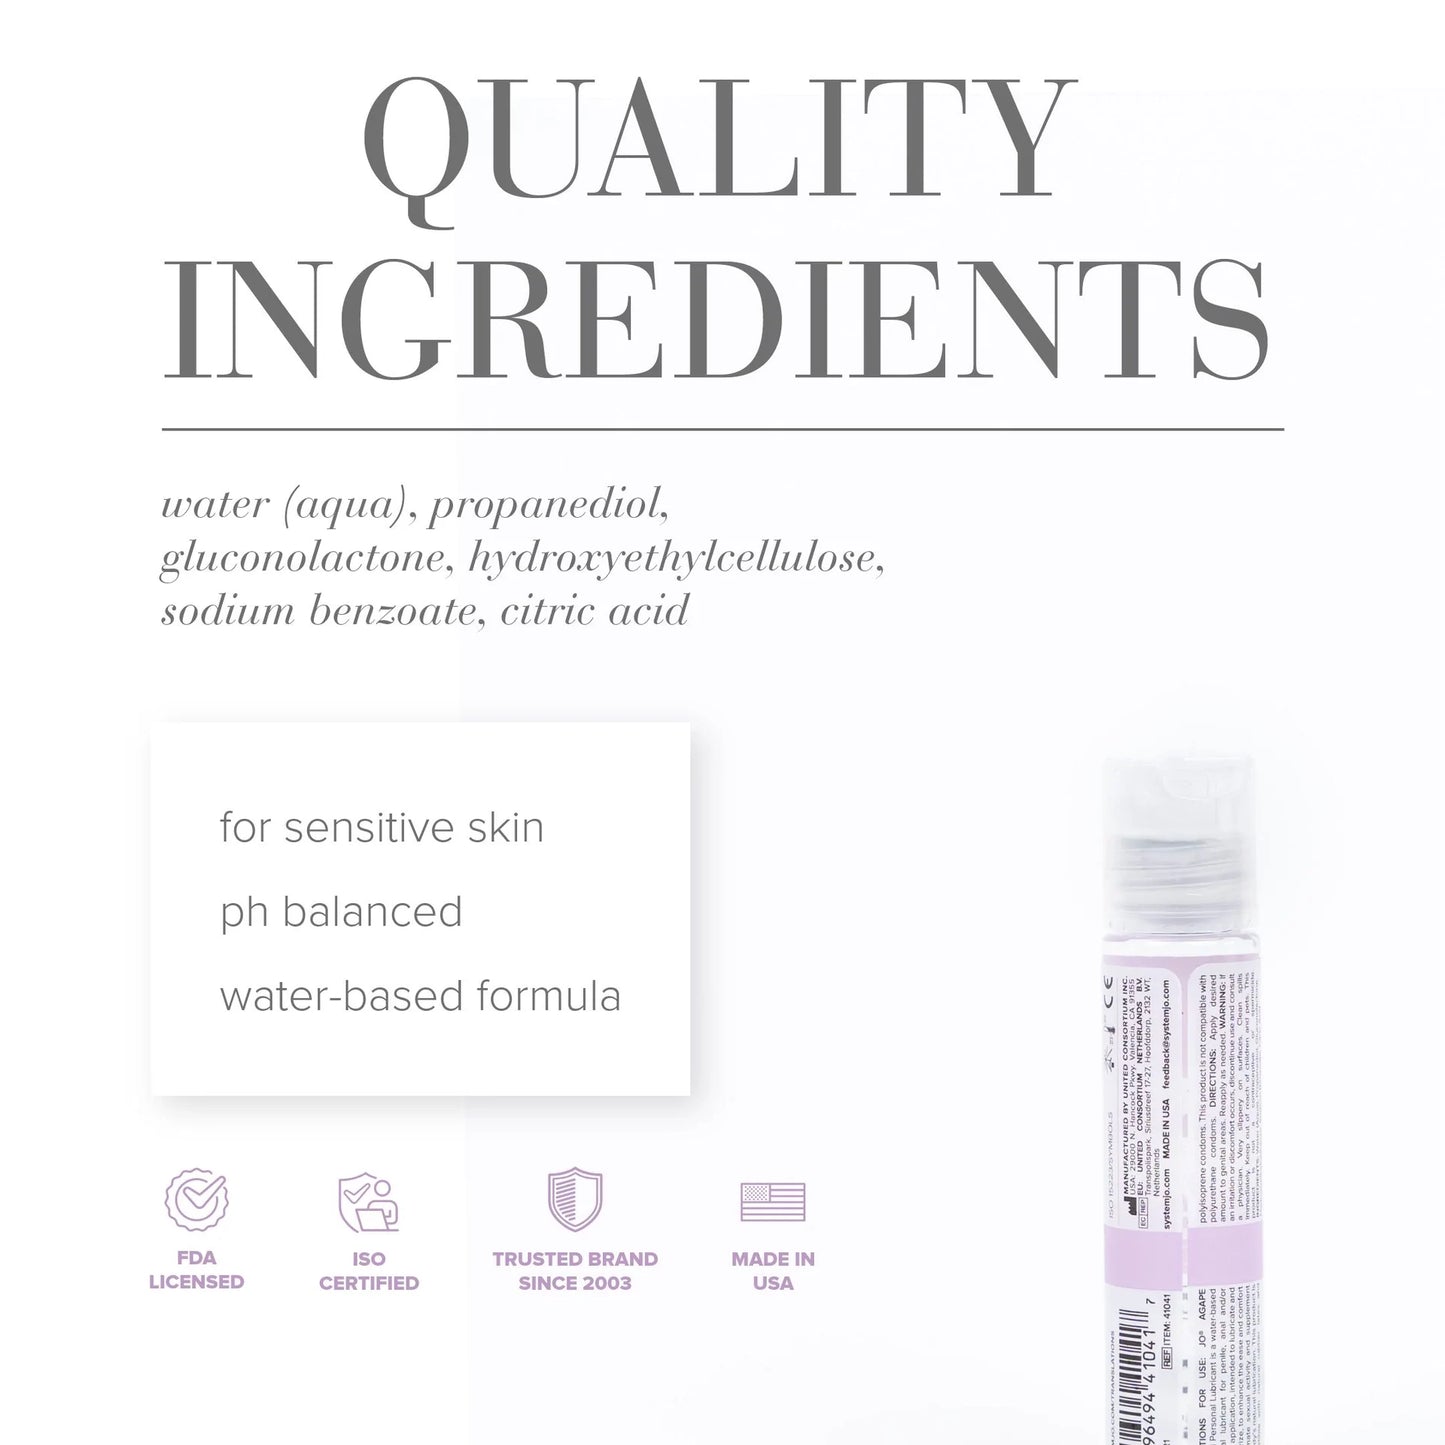 Quality Ingredients: water (aqua), propanediol, gluconolactone, hydroxyethylcellulose, sodium benzoate, citric acid. For sensitive skin, ph balanced, water-based formula, FDA licensed, ISO certified, trusted brand since 2003, made in USA.